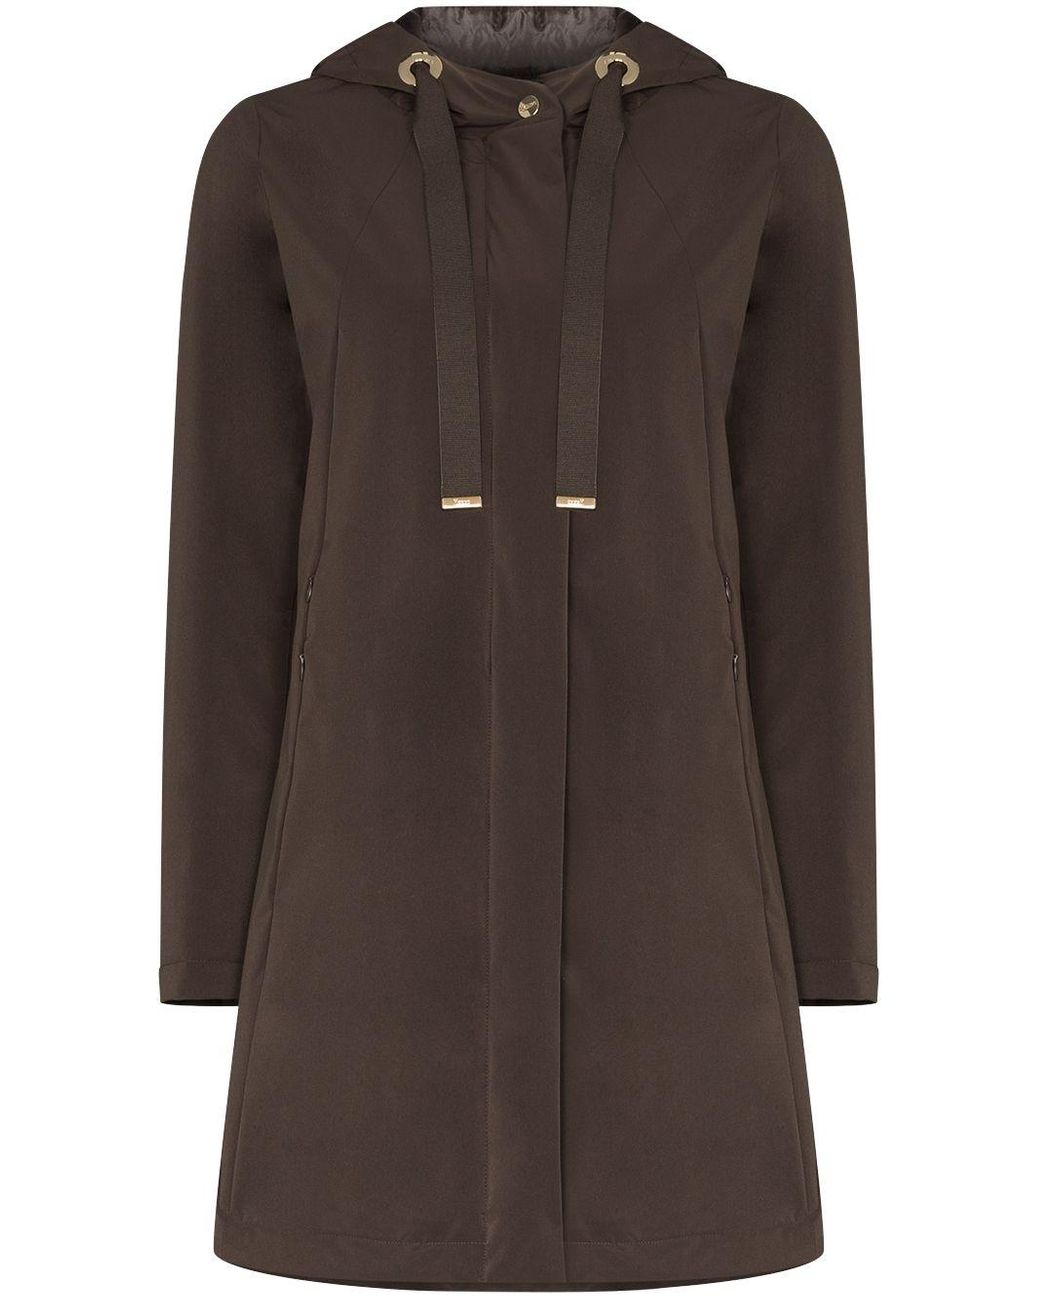 Herno Hooded Parka Coat in Brown - Lyst